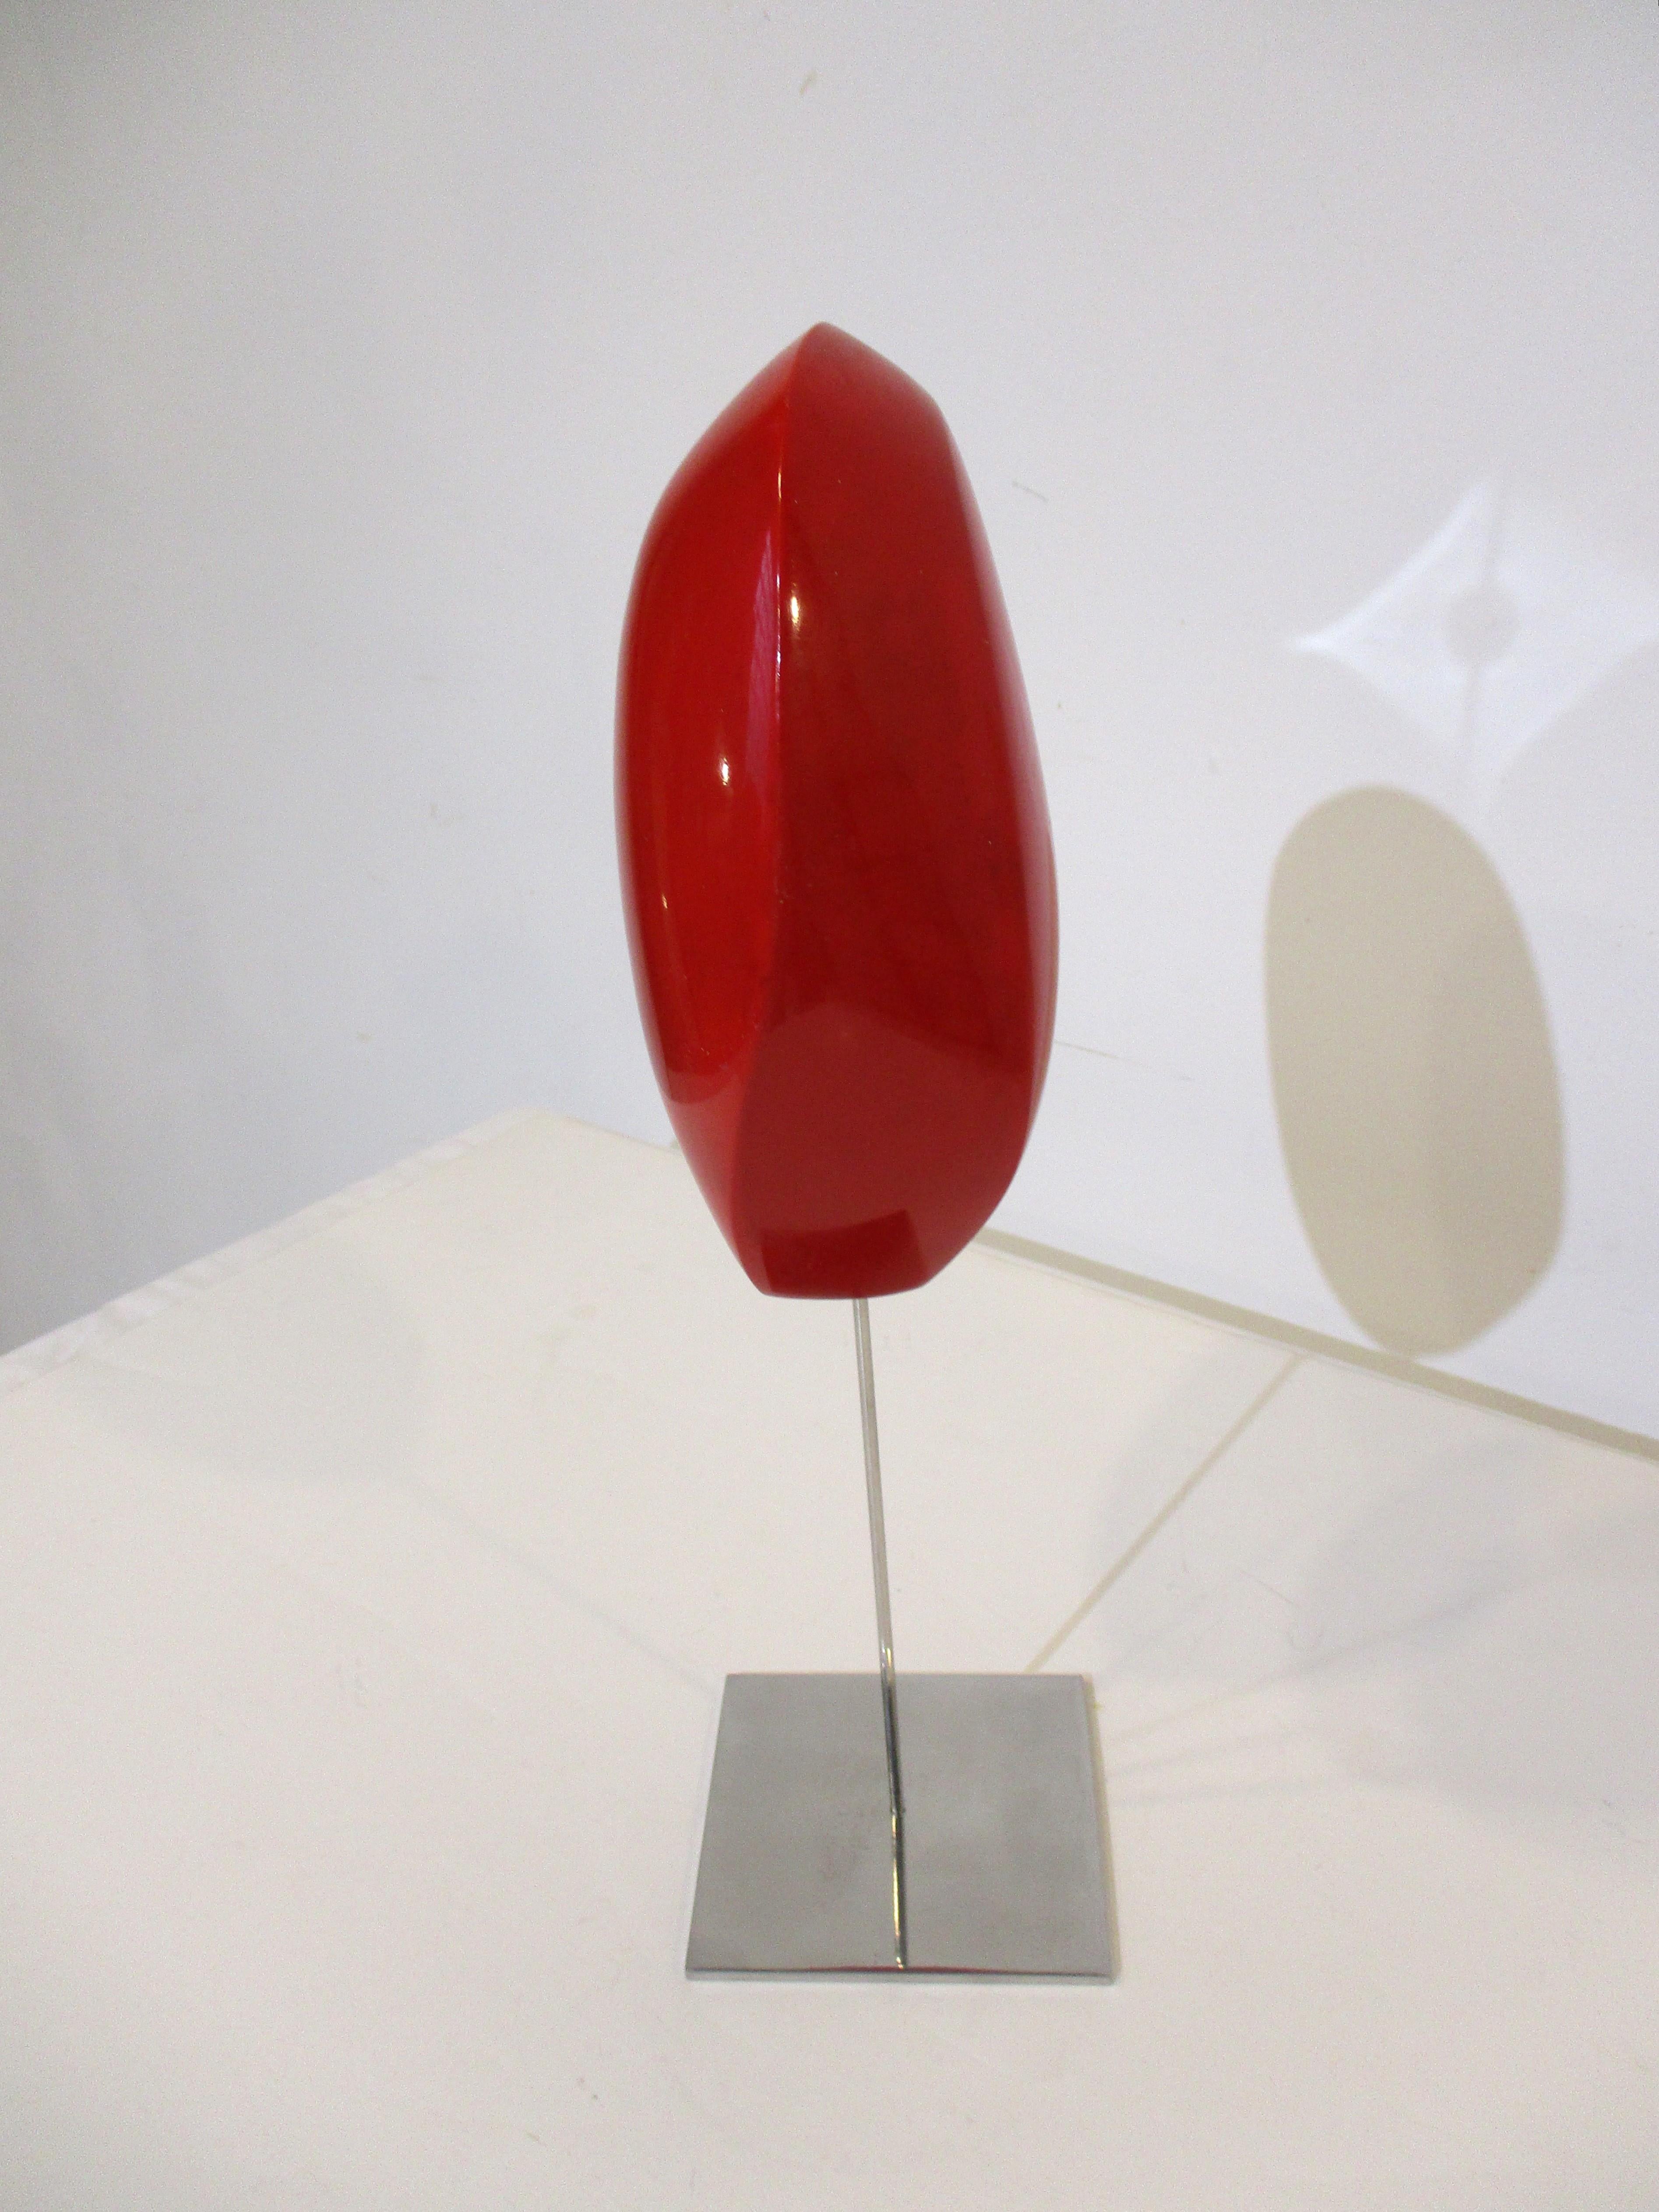 A very organic formed modern styled fiberglass sculpture in a blend of reds mounted on a chromed staff with chromed steel base. Made in the 1960's by Bucks county Pennsylvania artist Lawrence E. Glasson who's paintings, sculptures and objects were